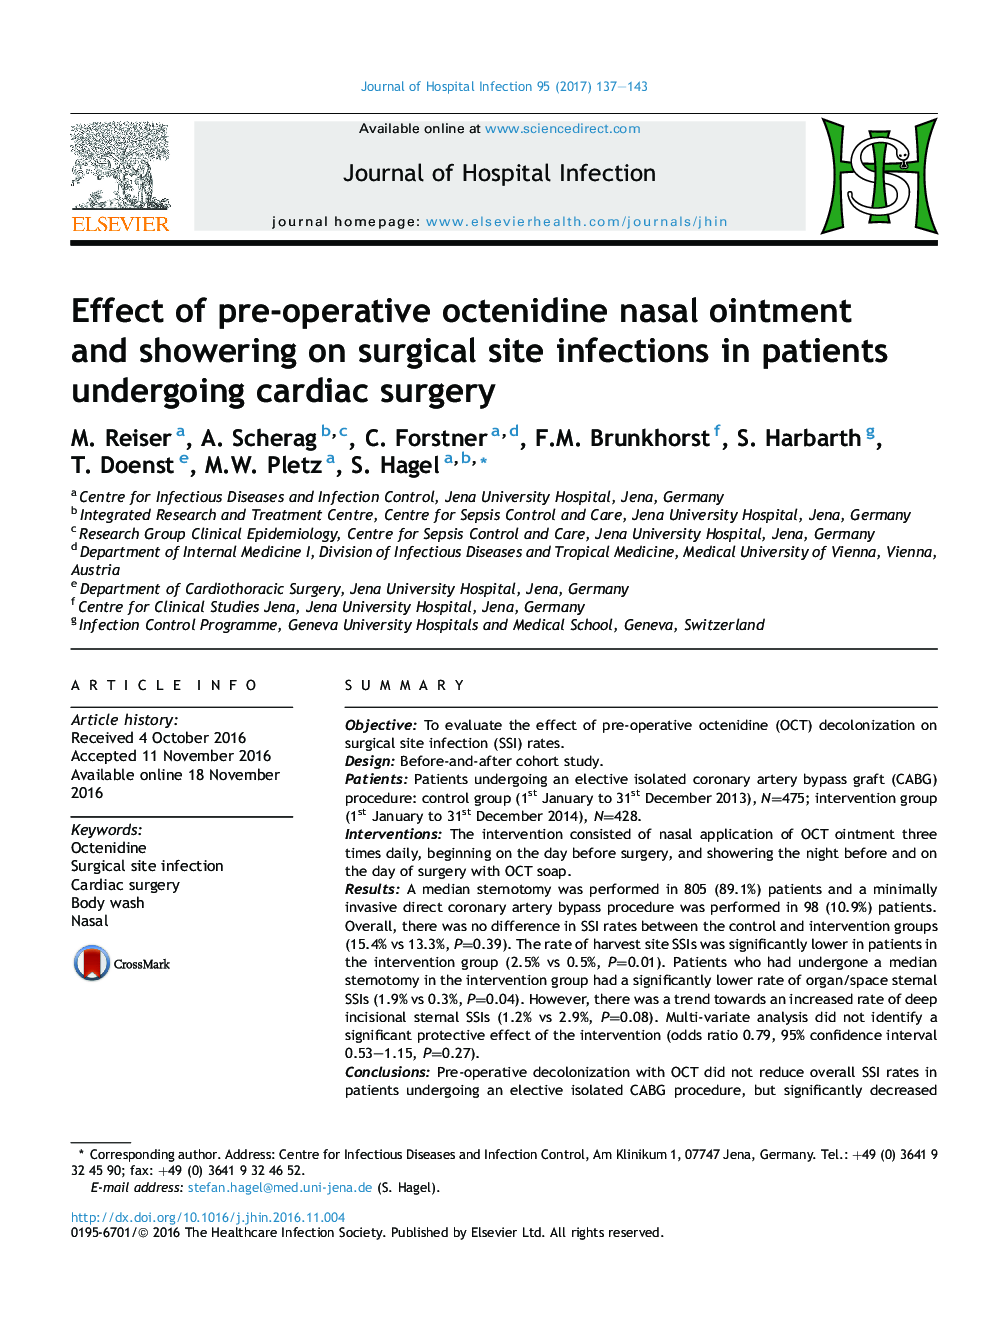 Effect of pre-operative octenidine nasal ointment andÂ showering on surgical site infections in patients undergoing cardiac surgery